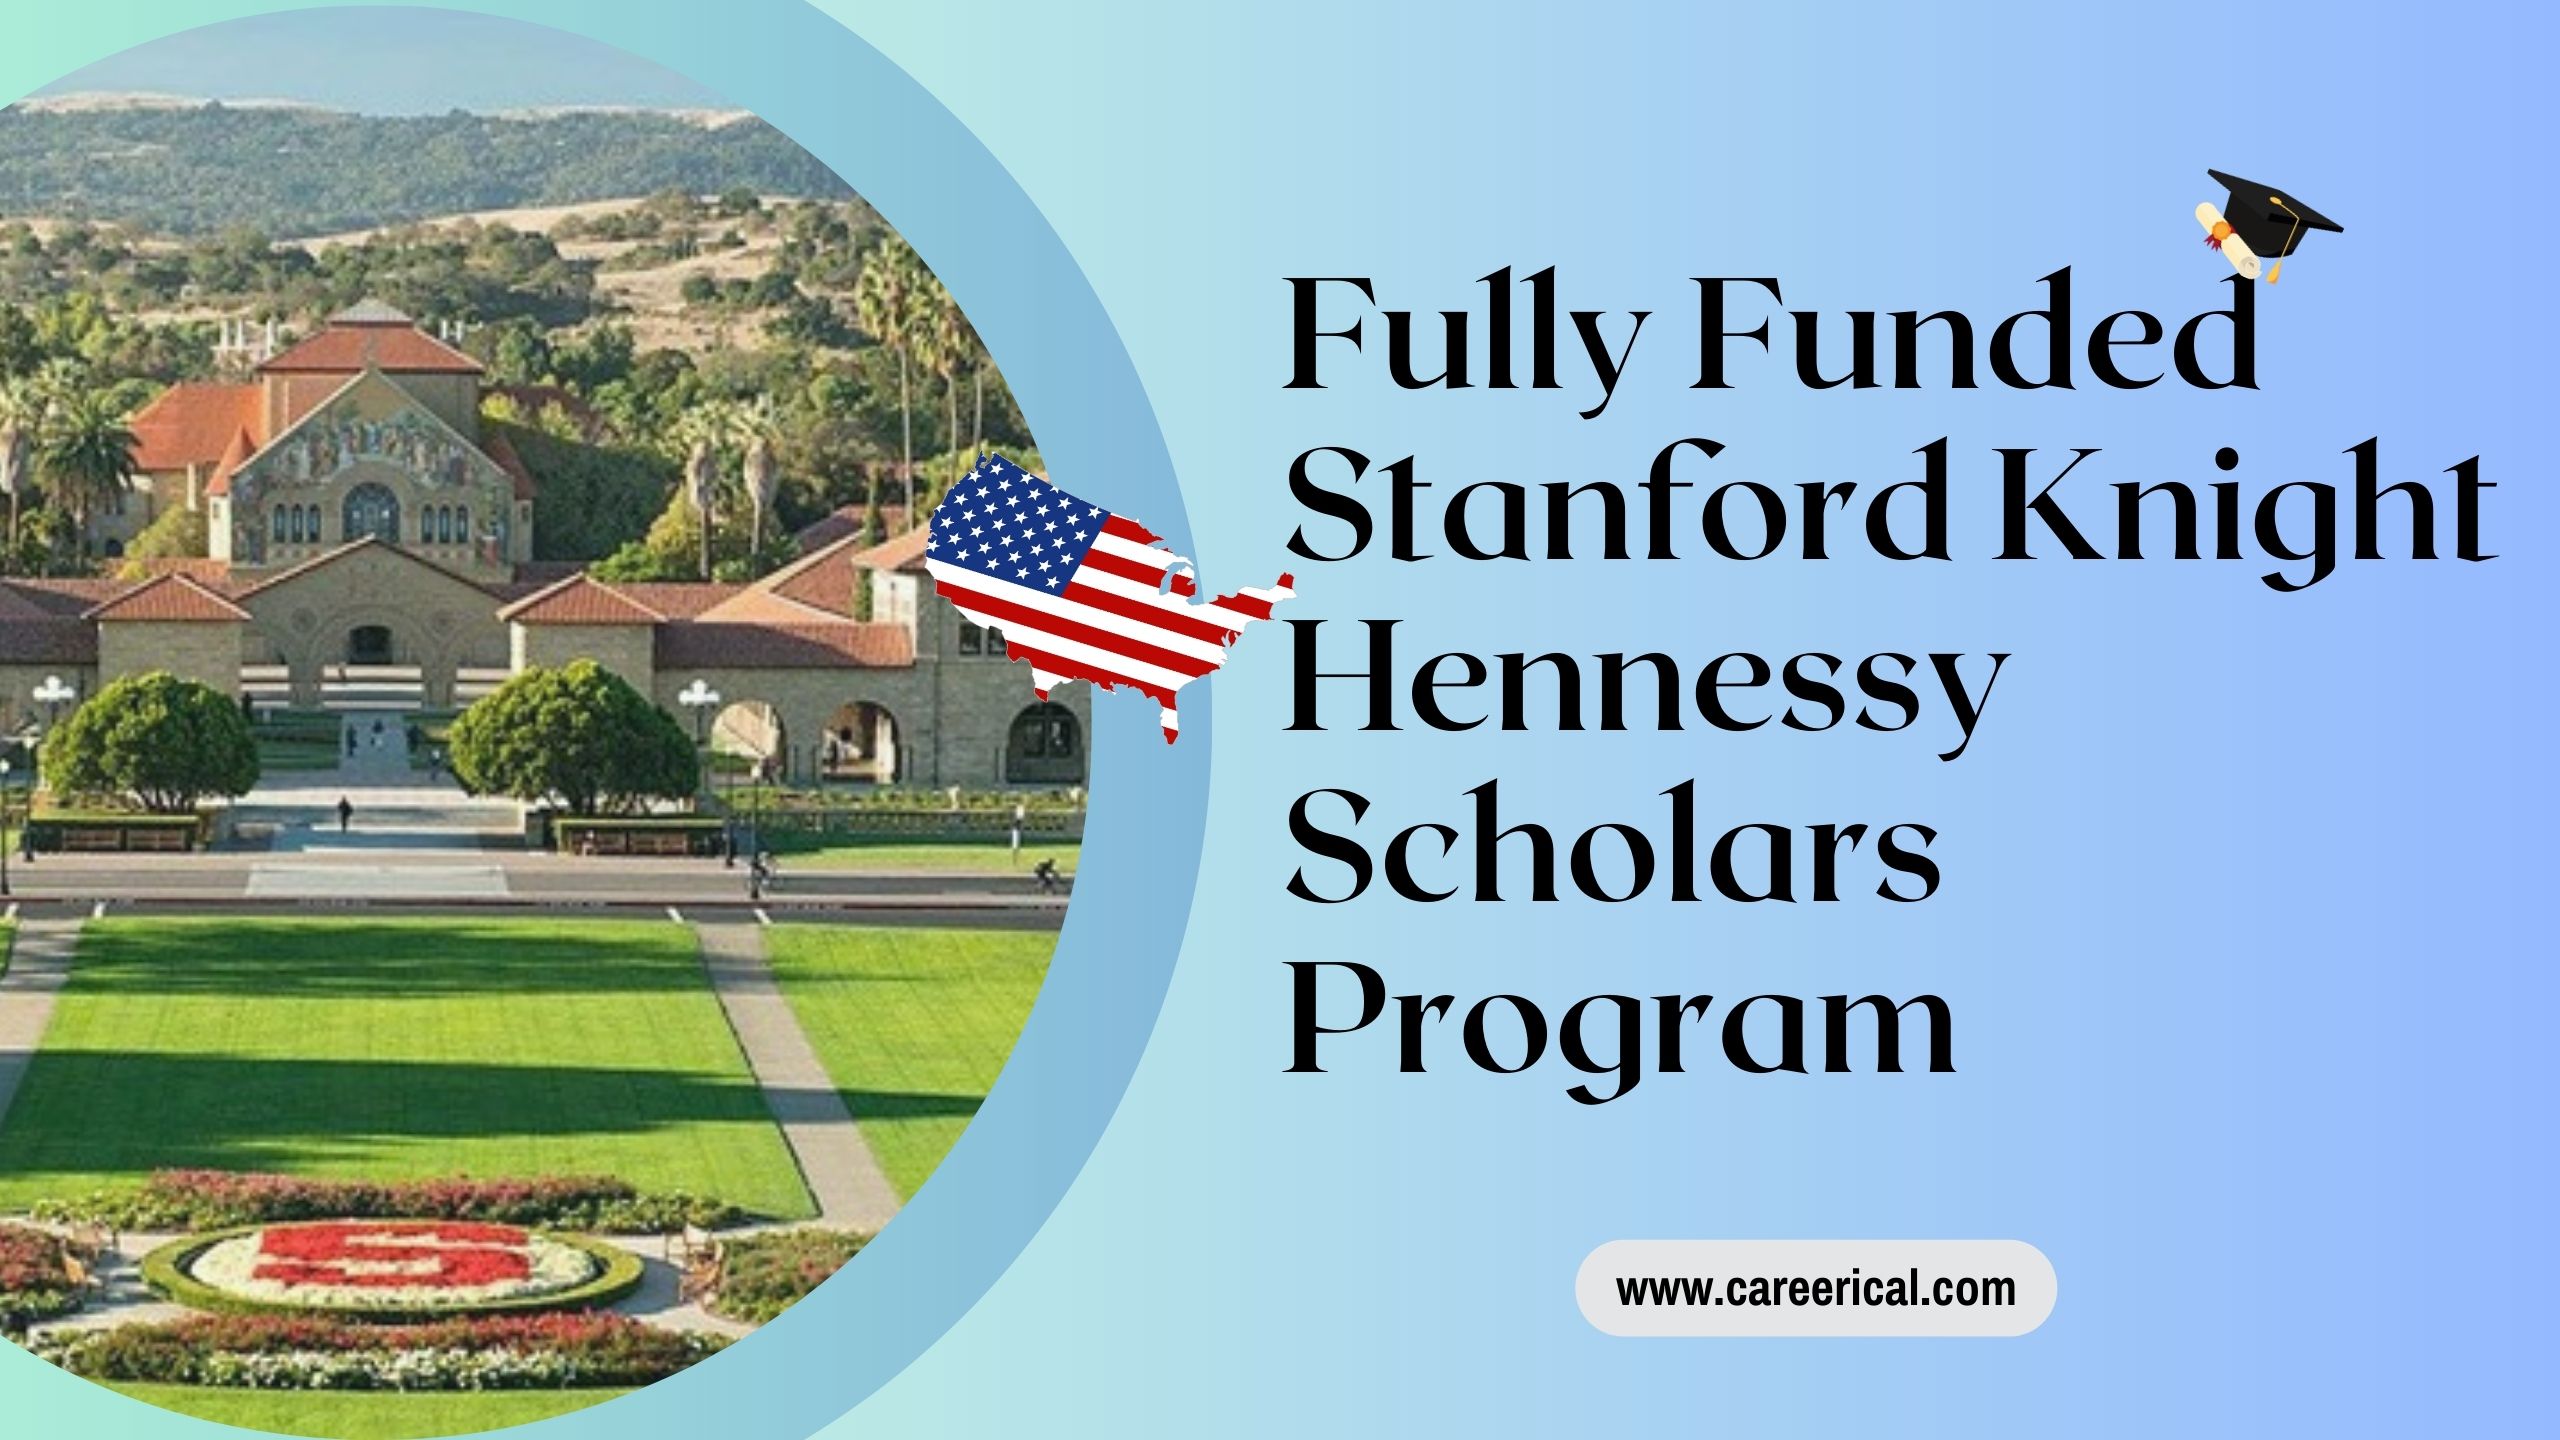 🇺🇸 Take the Leap Fully Funded Stanford Knight Hennessy Scholars